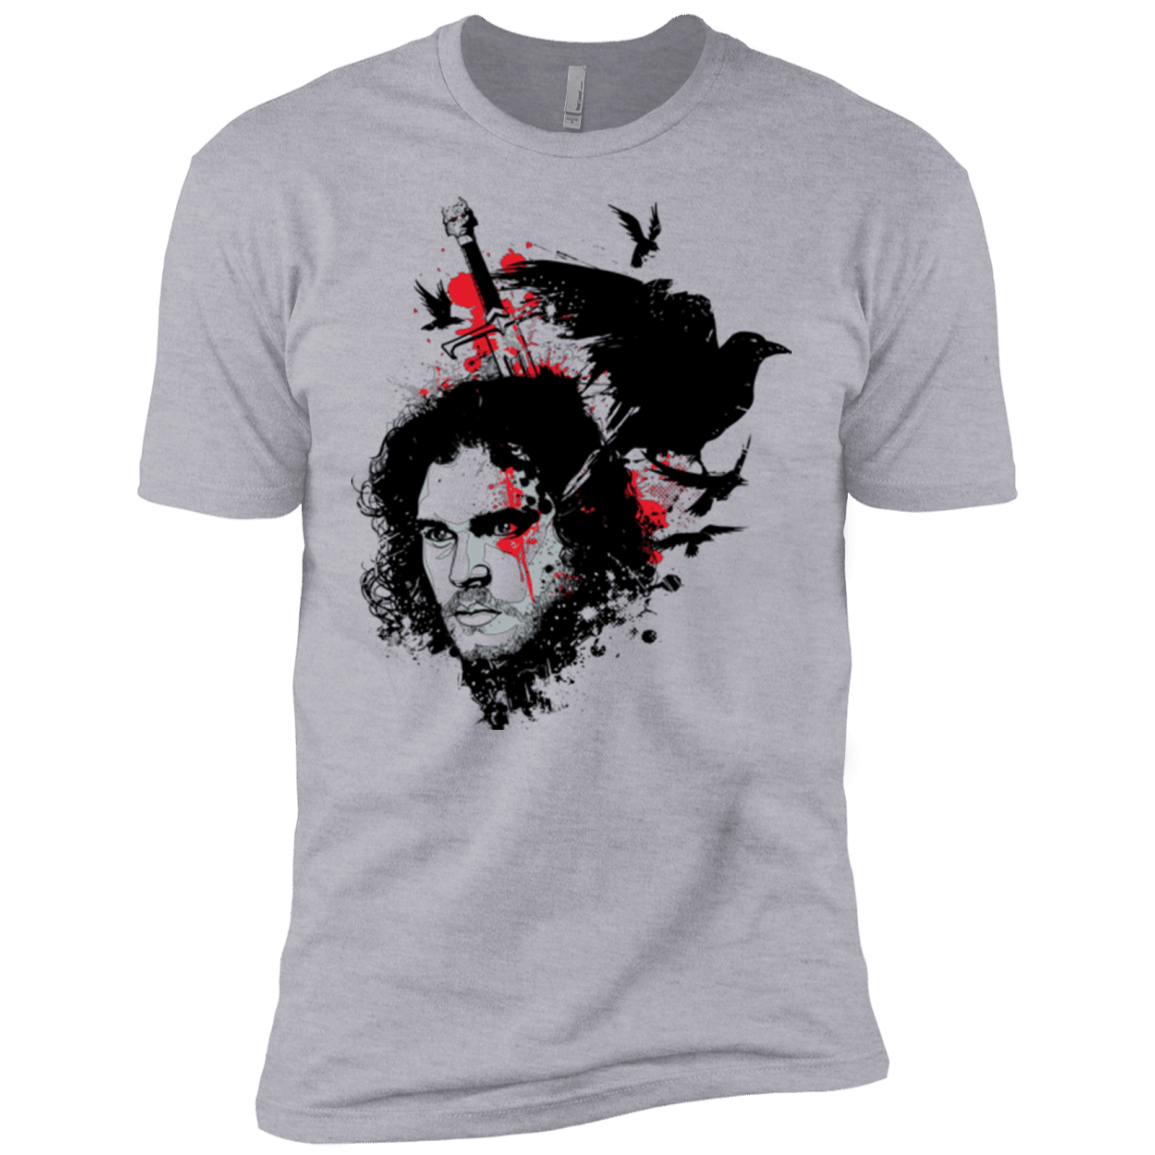 T-Shirts Heather Grey / X-Small KING IN THE NORTH Men's Premium T-Shirt